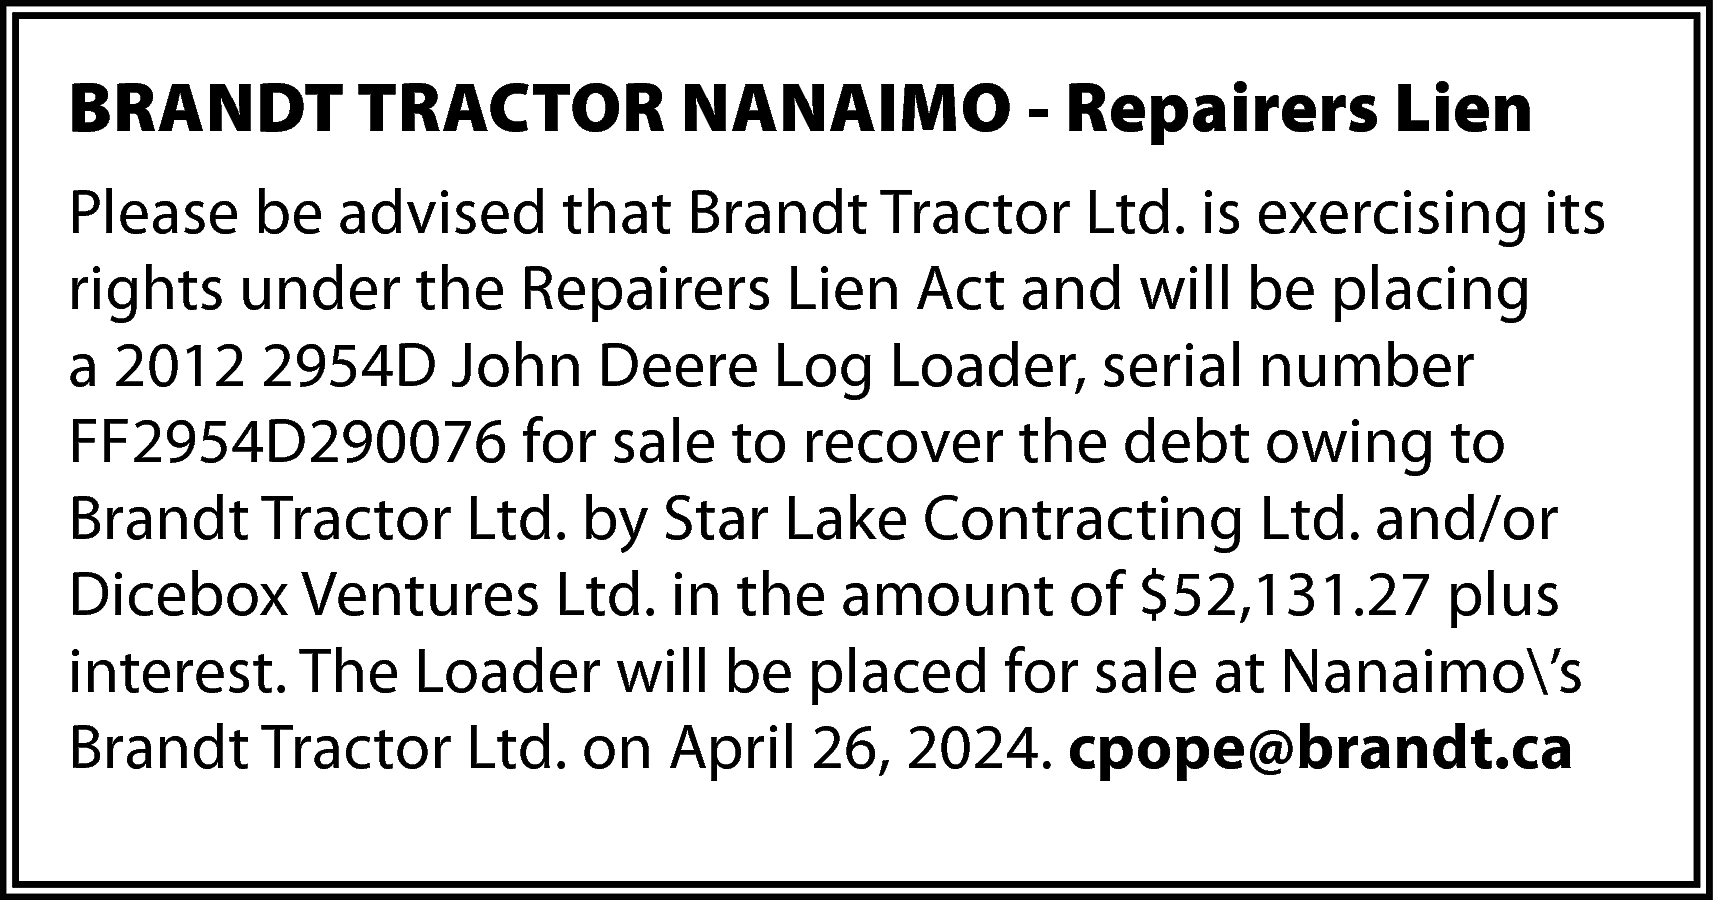 BRANDT TRACTOR NANAIMO - Repairers  BRANDT TRACTOR NANAIMO - Repairers Lien  Please be advised that Brandt Tractor Ltd. is exercising its  rights under the Repairers Lien Act and will be placing  a 2012 2954D John Deere Log Loader, serial number  FF2954D290076 for sale to recover the debt owing to  Brandt Tractor Ltd. by Star Lake Contracting Ltd. and/or  Dicebox Ventures Ltd. in the amount of $52,131.27 plus  interest. The Loader will be placed for sale at Nanaimo’s  Brandt Tractor Ltd. on April 26, 2024. cpope@brandt.ca    